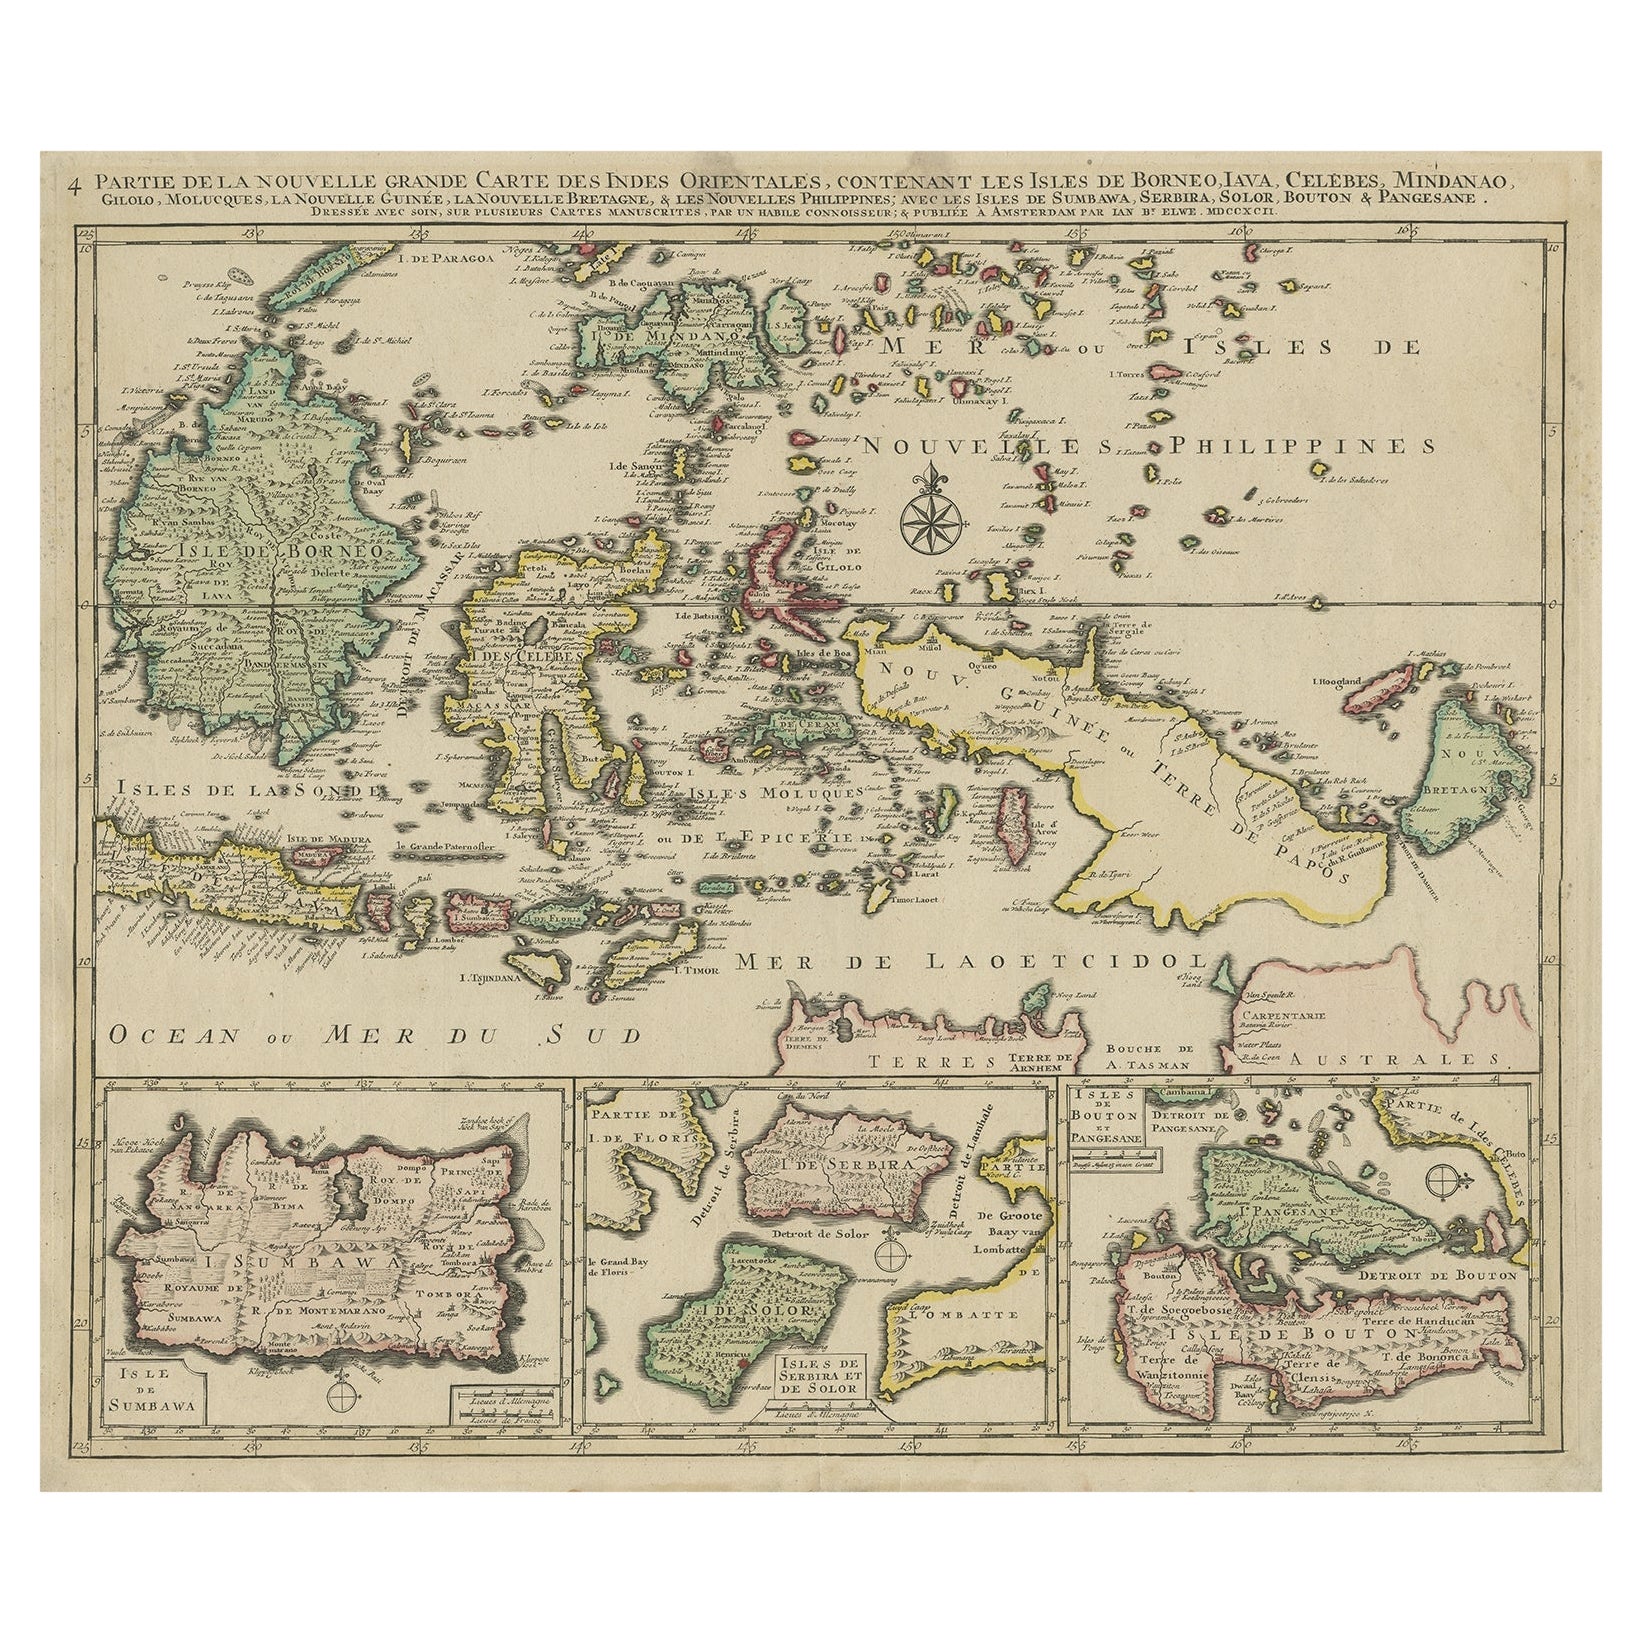 Old Map of the East Indonesian Islands Borneo, Celebes, New Guinea, Bali, 1792 For Sale